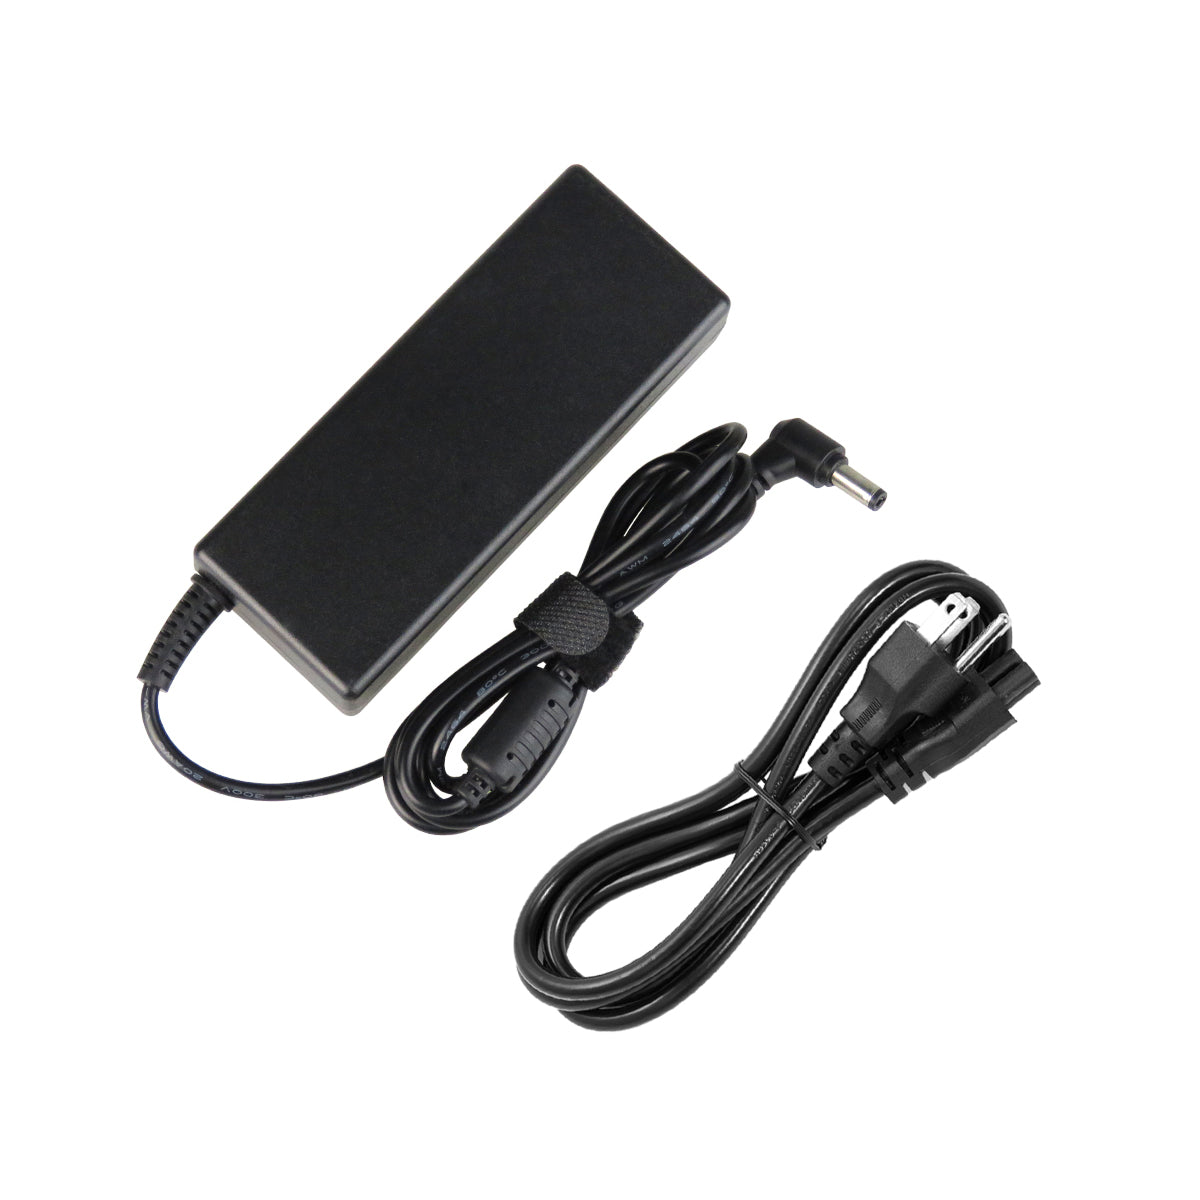 AC Adapter Charger for ASUS K55VM Laptop.